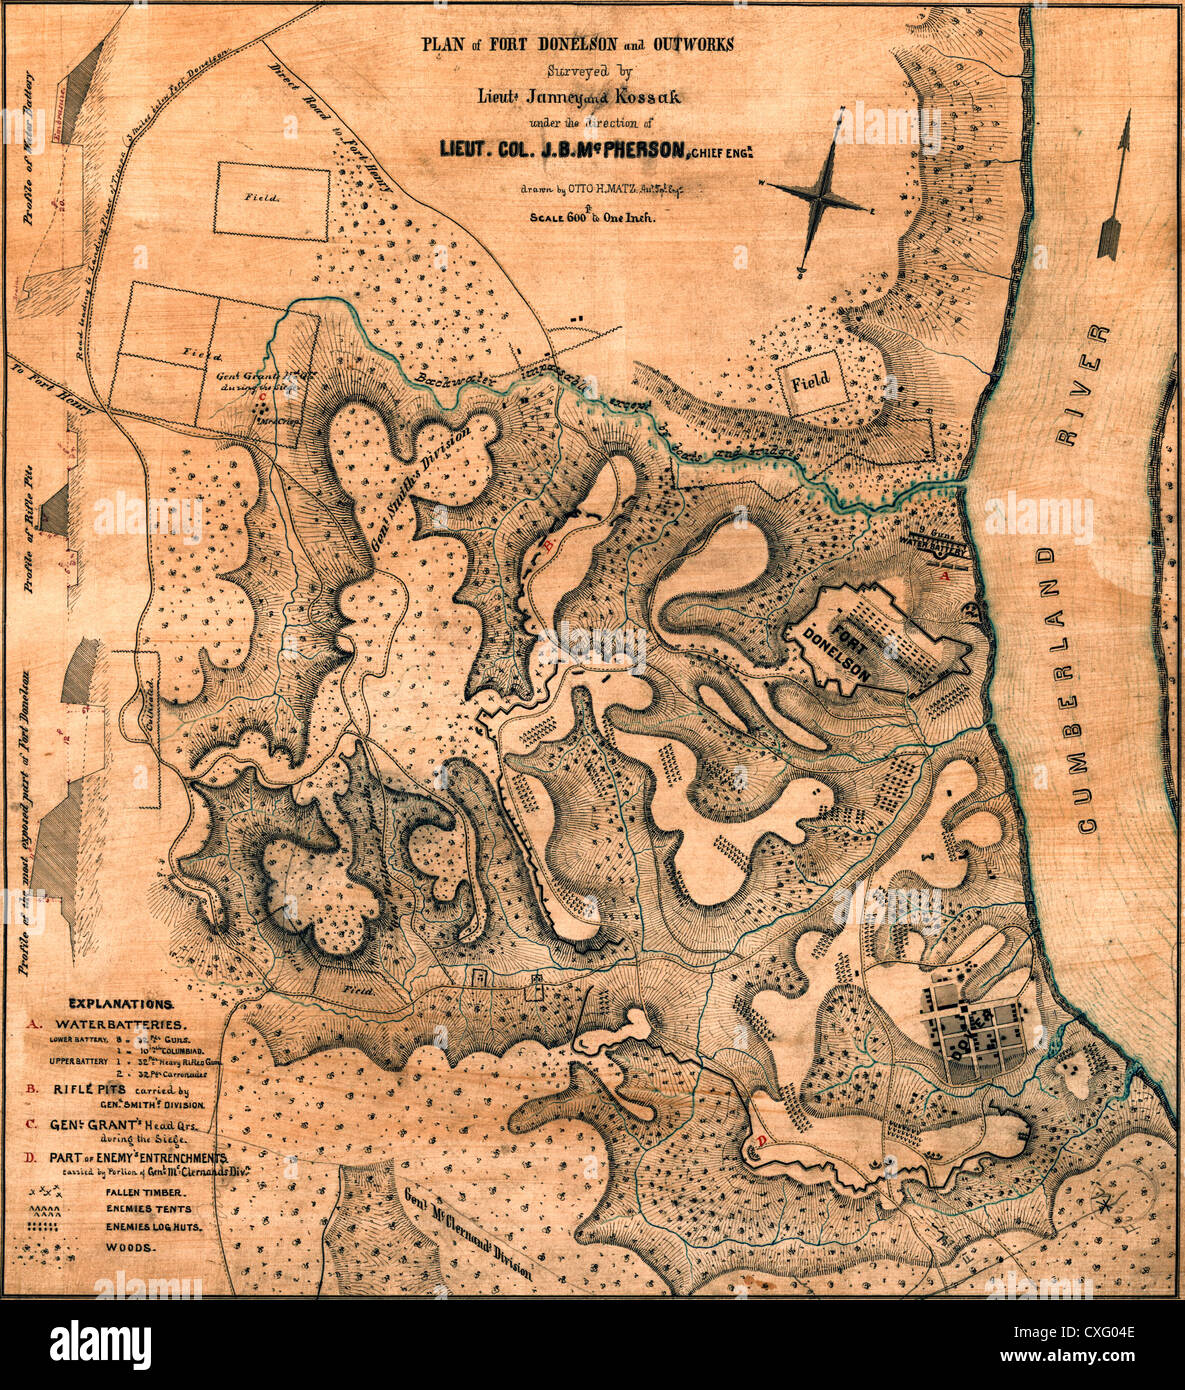 Plan of Fort Donelson and its outworks, Tennessee, USA Civil War, February, 1862 Stock Photo